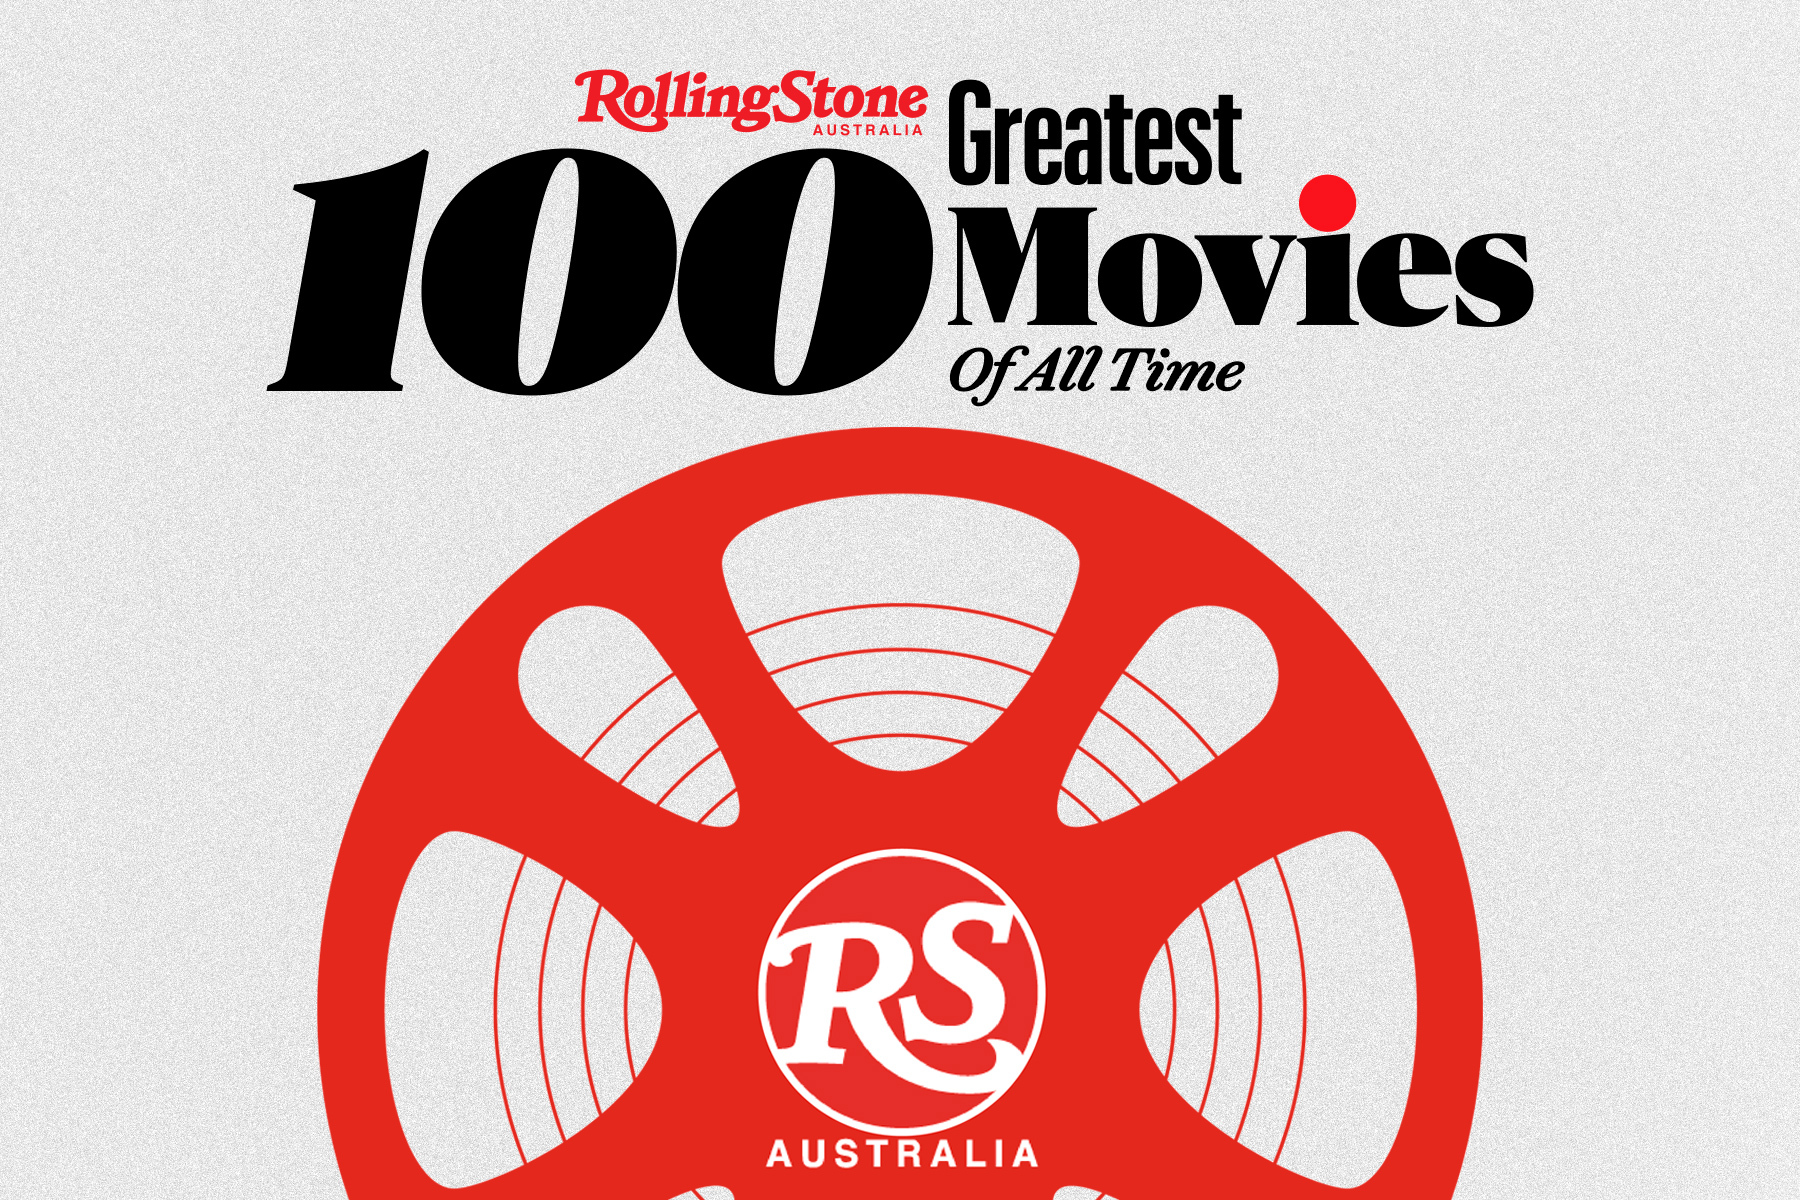 Rolling Stone Announces the Greatest Movies of All Time Poll